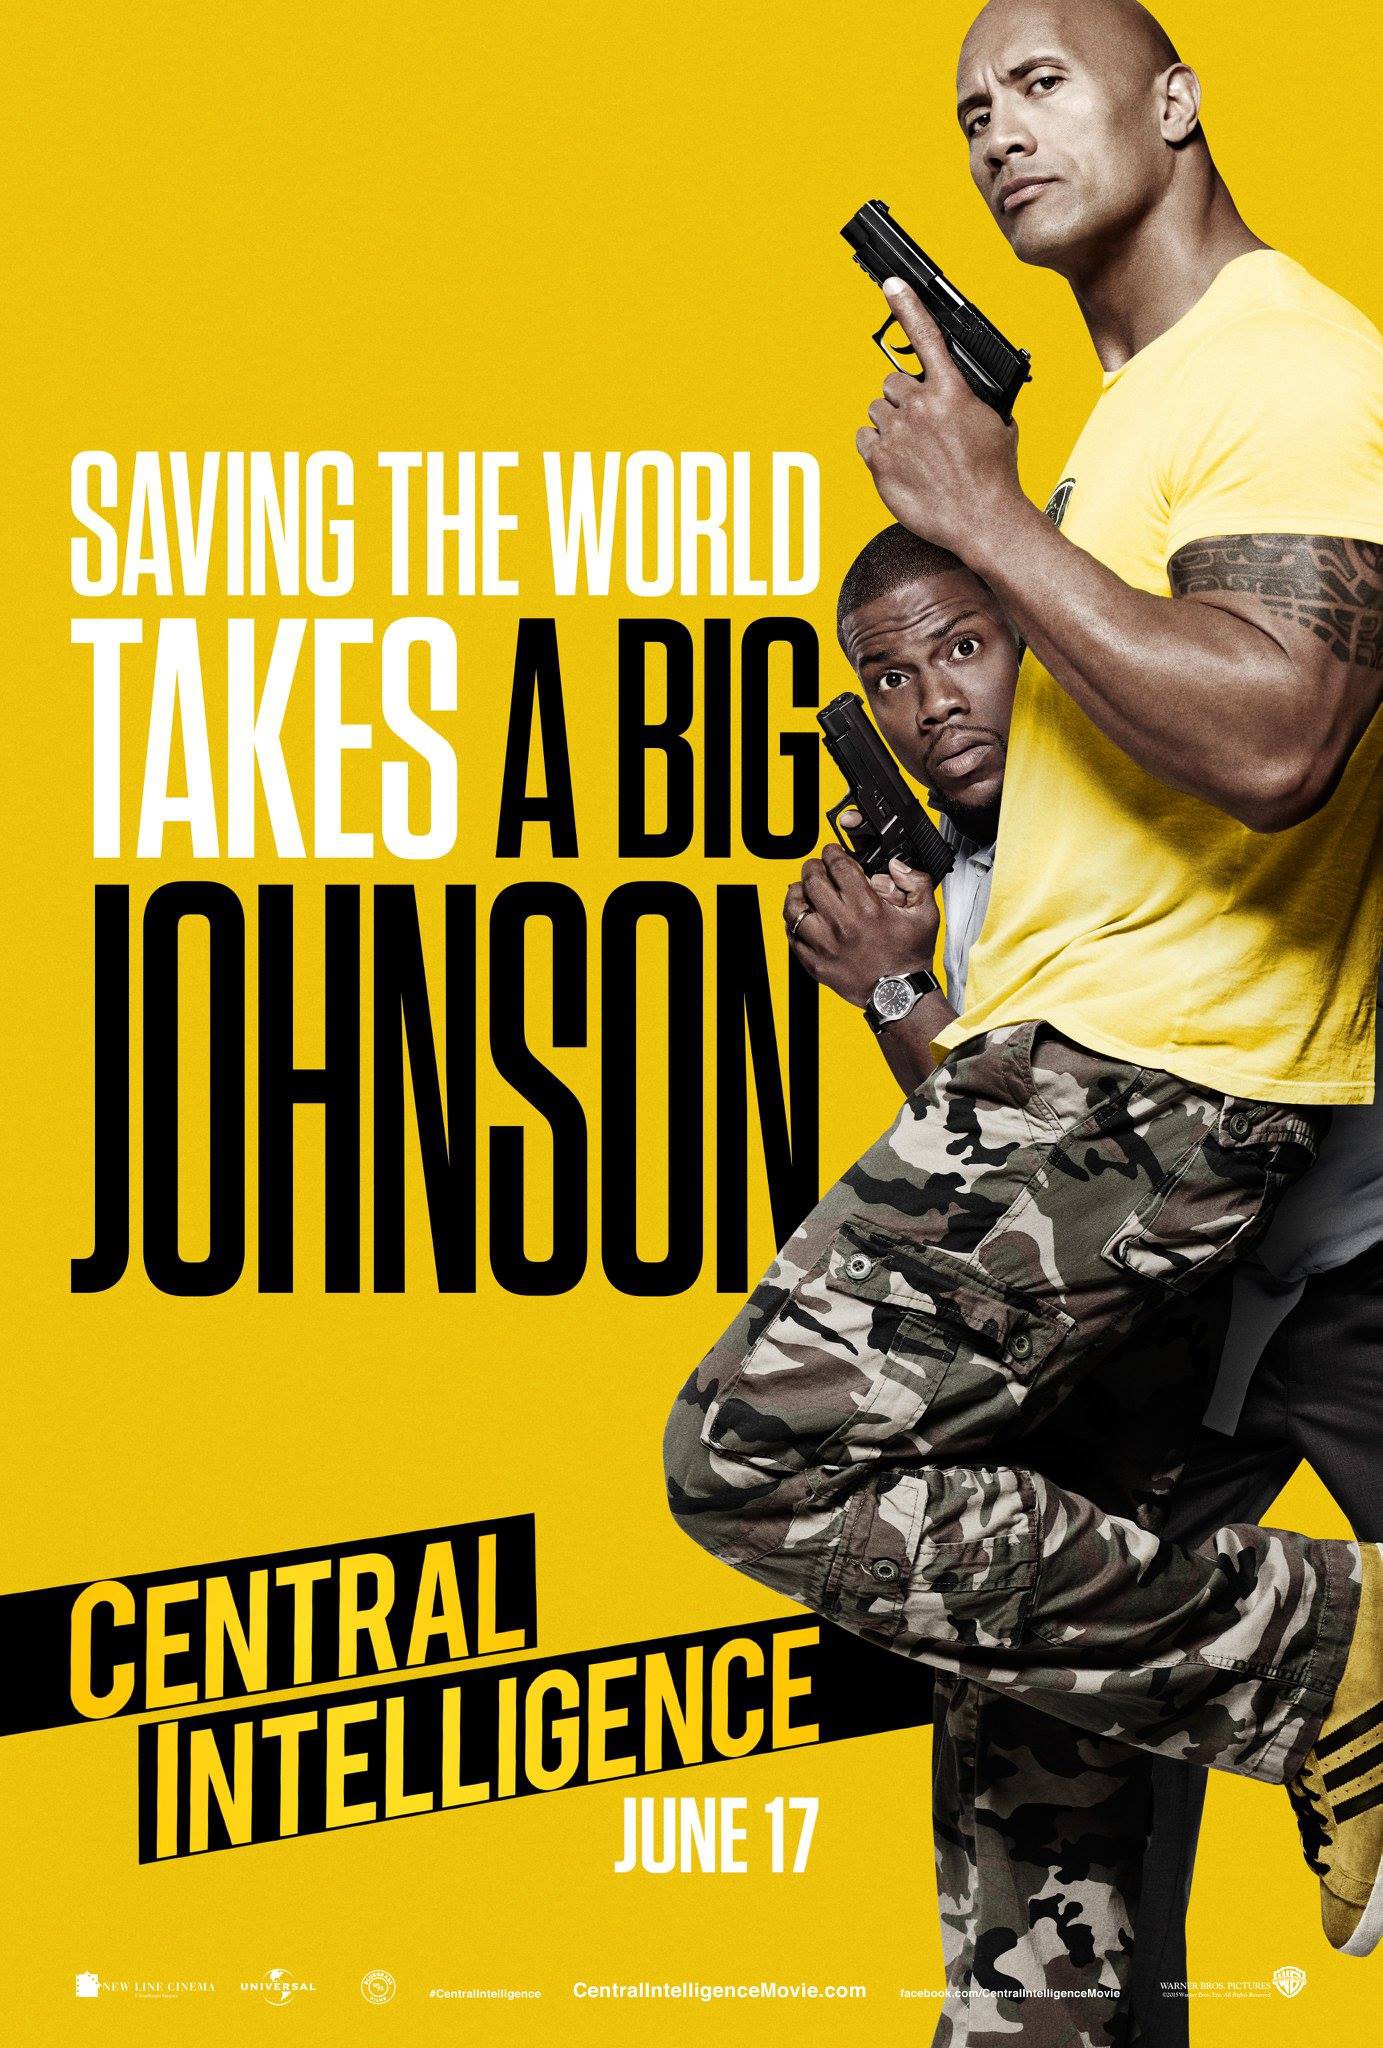 Central Intelligence Movie Poster ( of 3)